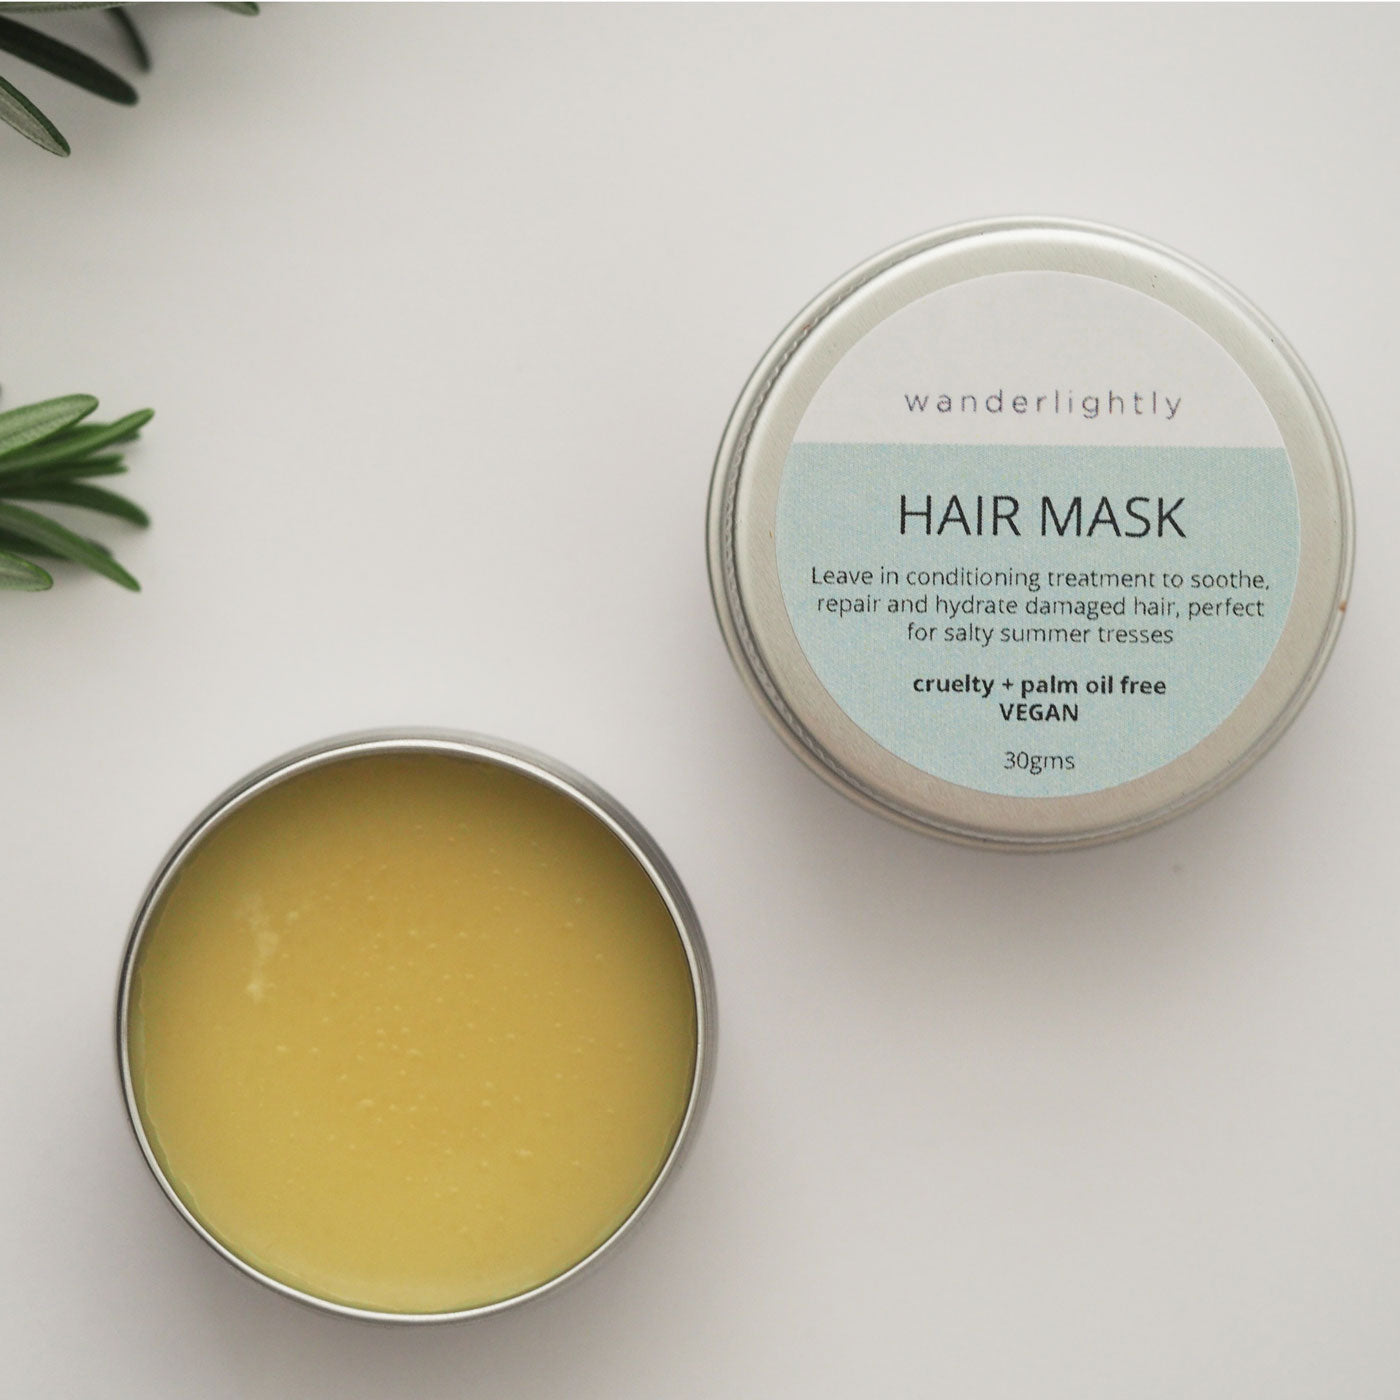 Wanderlightly leave in conditioning hair mask. All natural & handmade in a plastic-free tub.